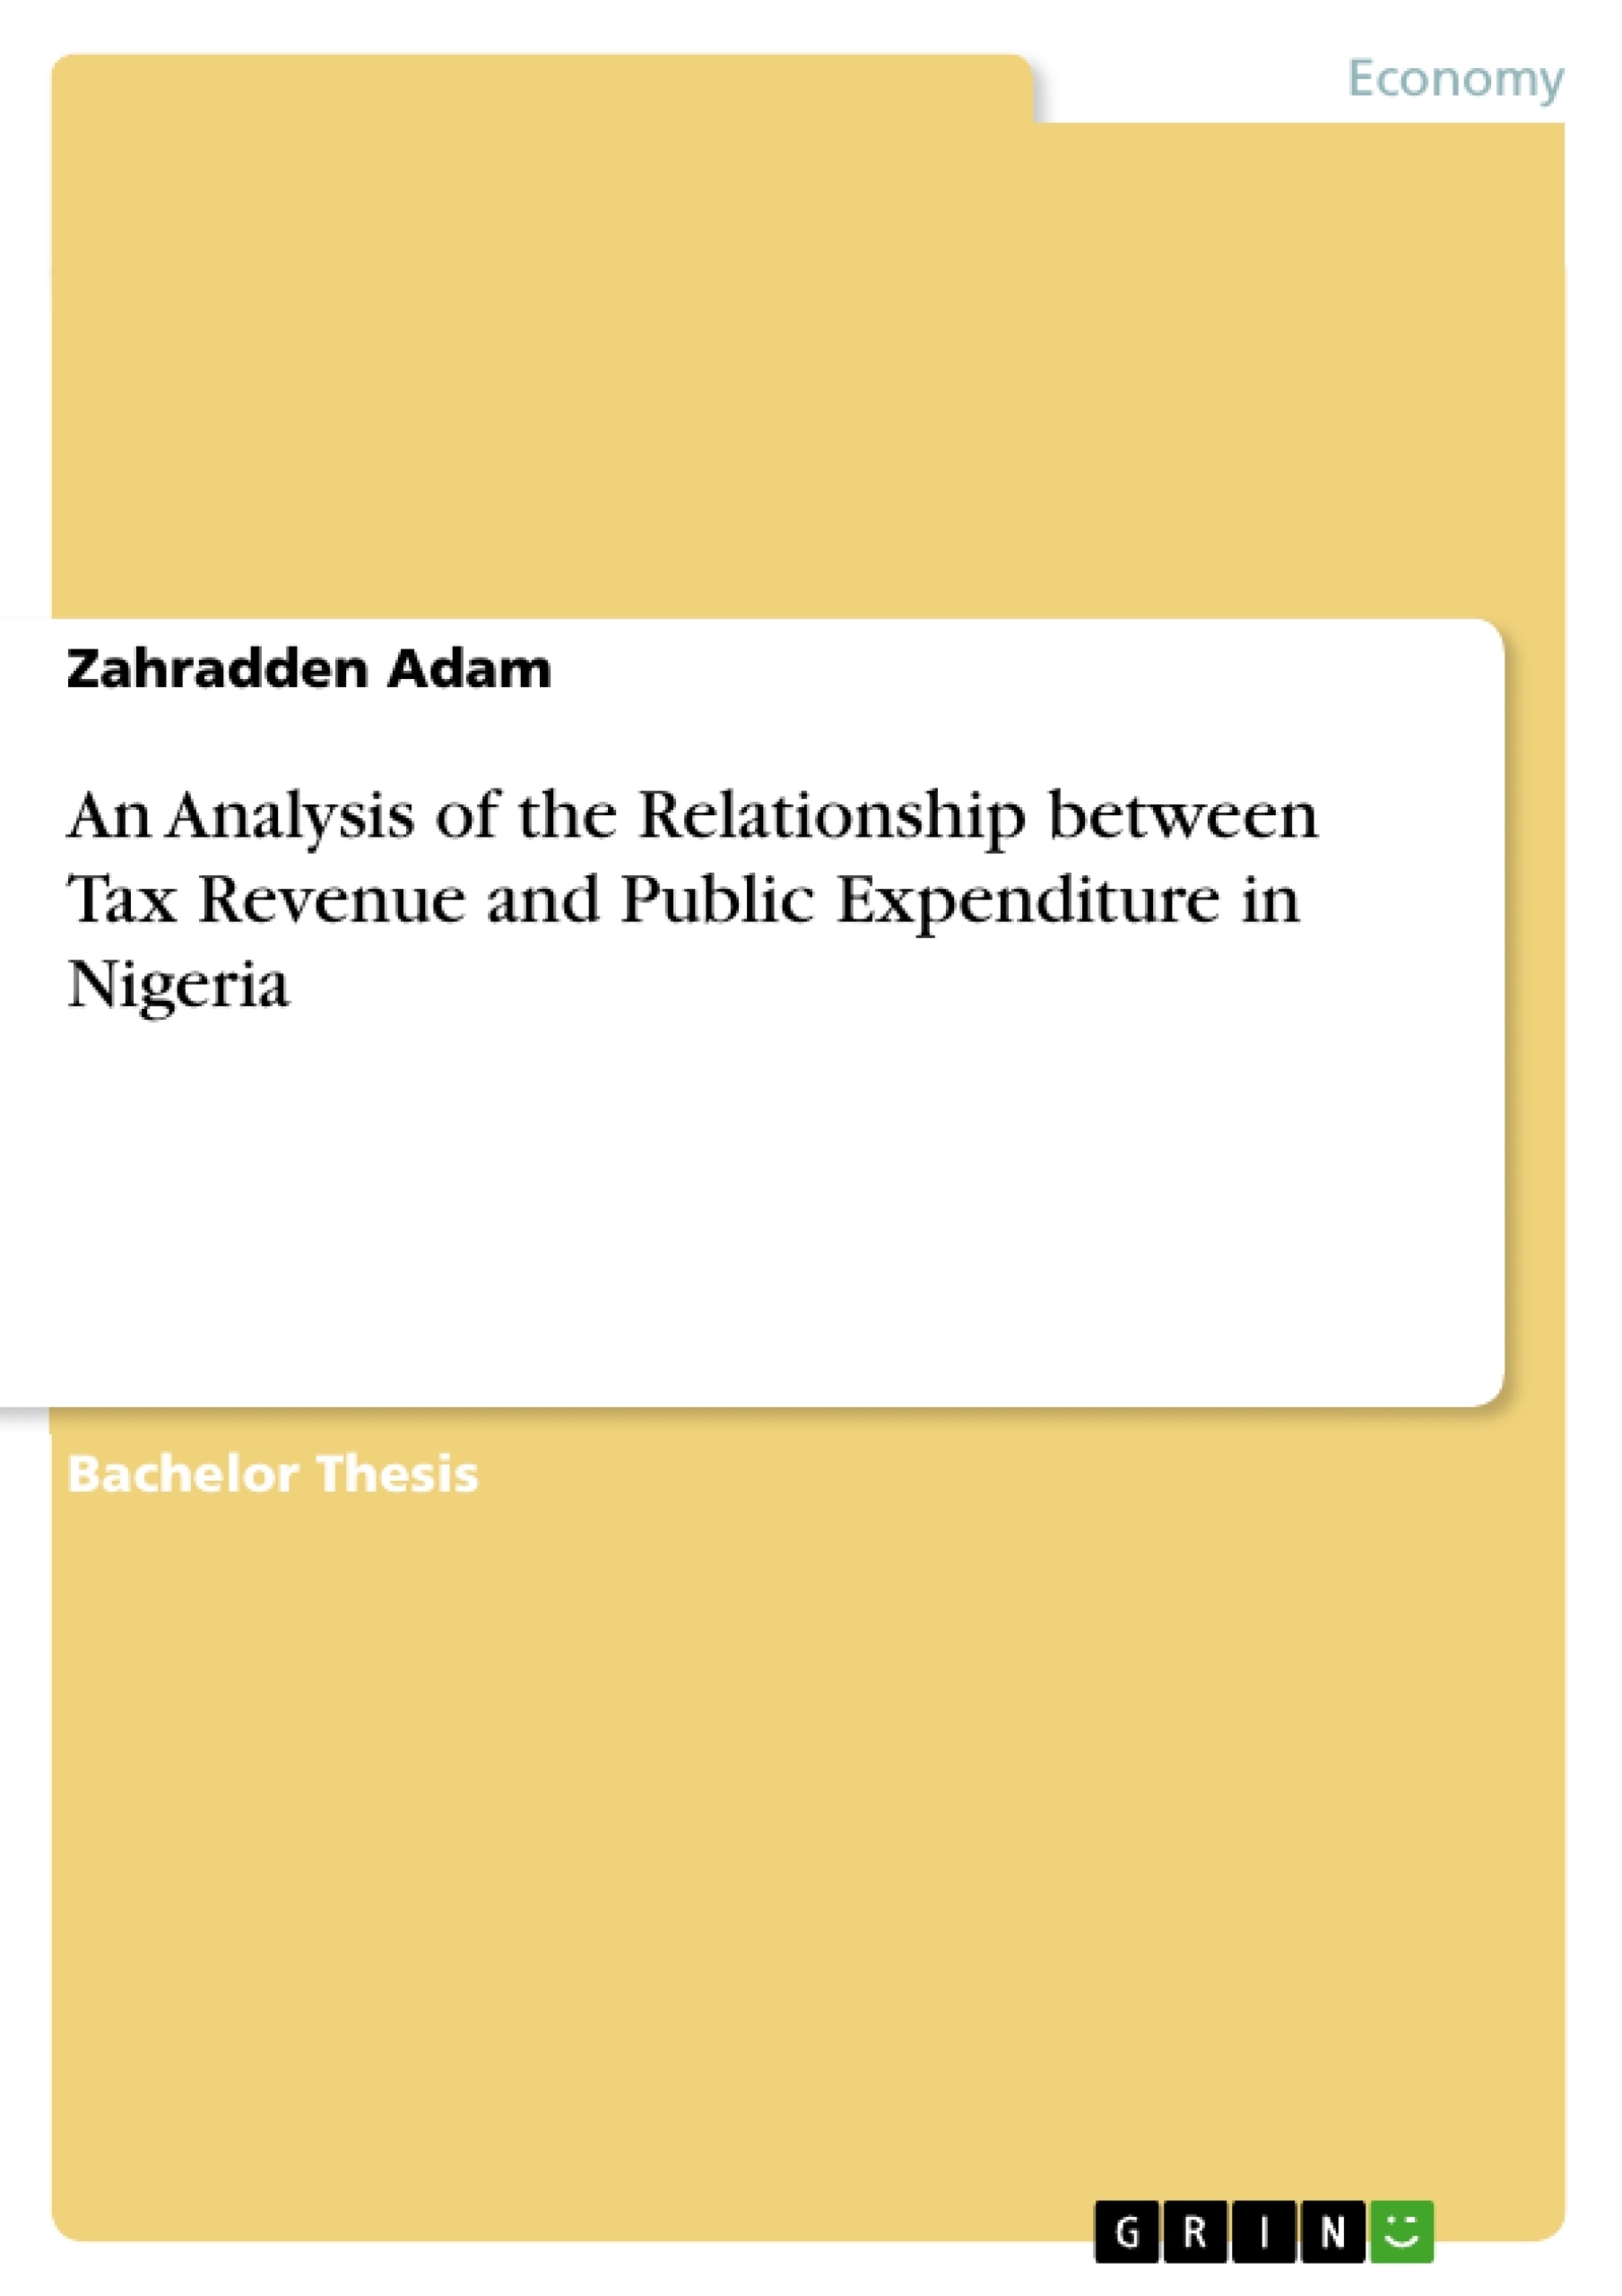 Título: An Analysis of the Relationship between Tax Revenue and Public Expenditure in Nigeria